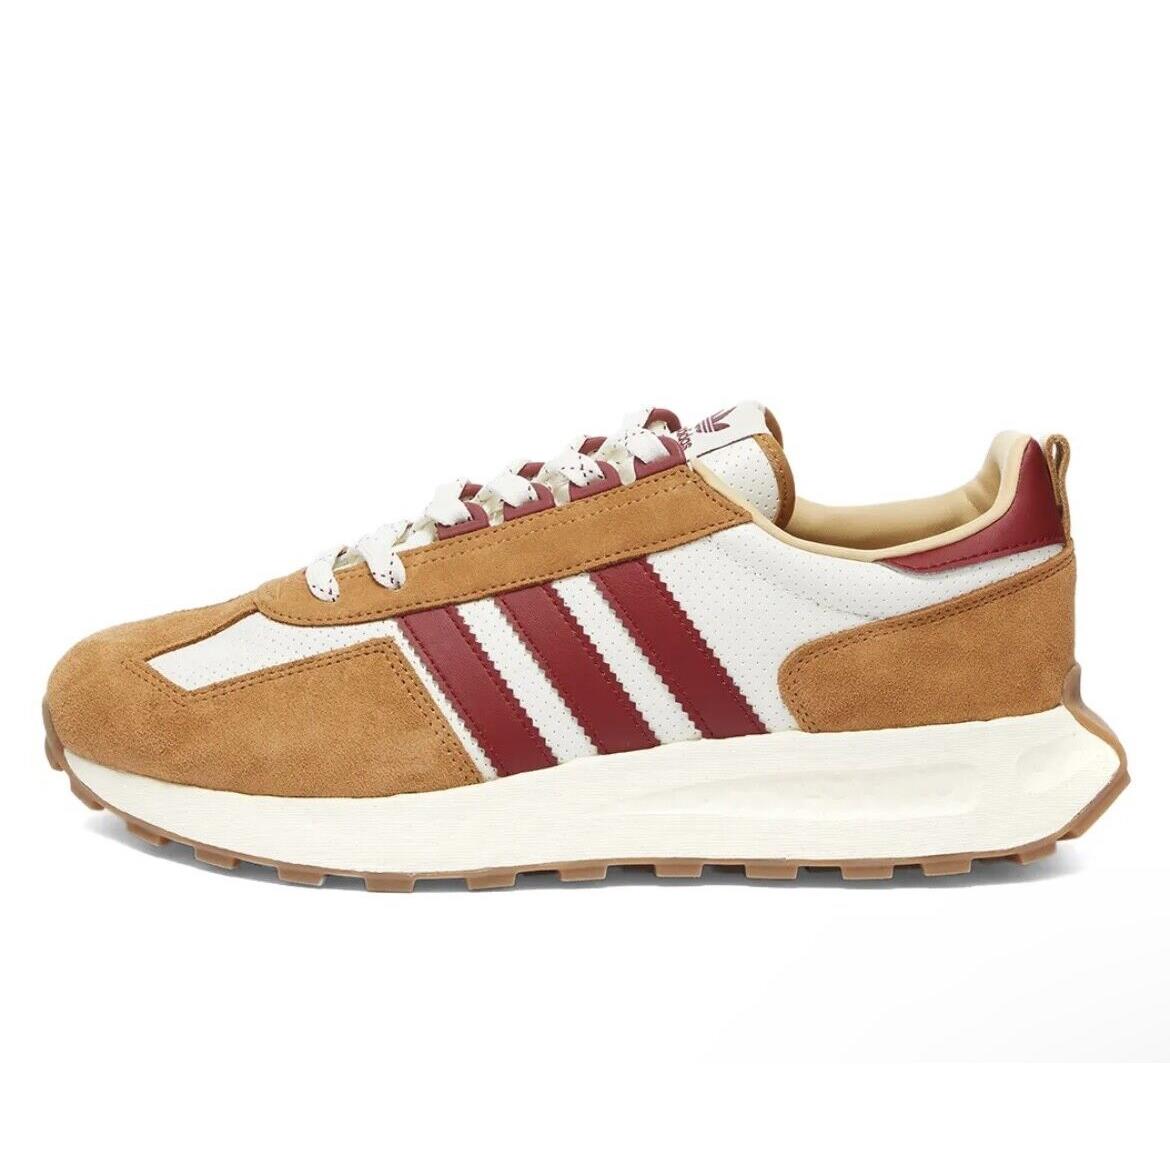 Adidas shoes Retropy - White Red Brown Beige 2